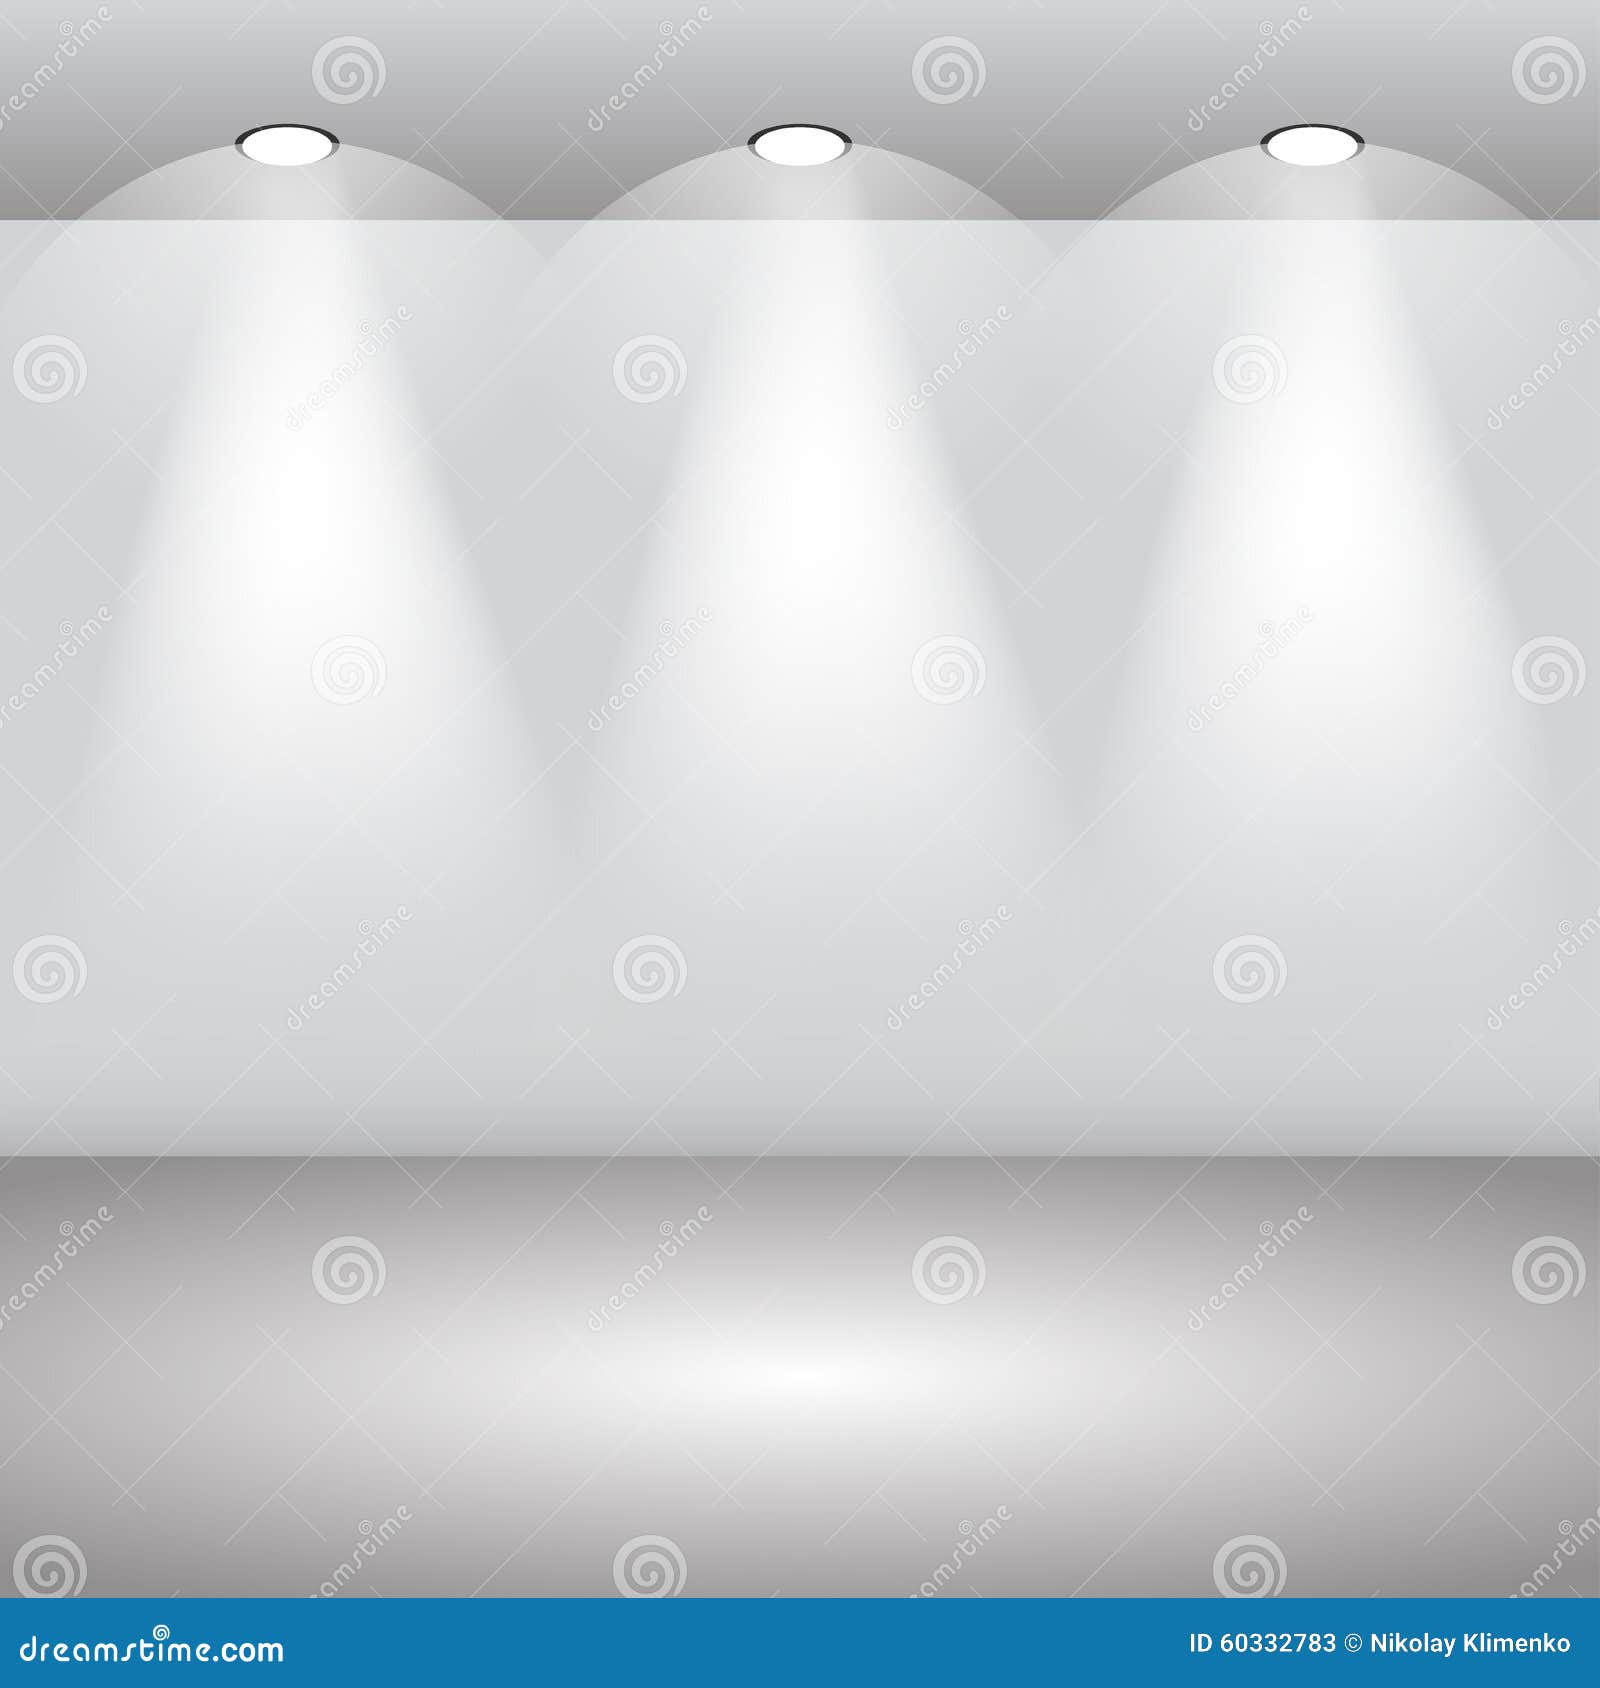 Gallery Interior with Empty Wall and Lights Eps 10 Stock Vector ...